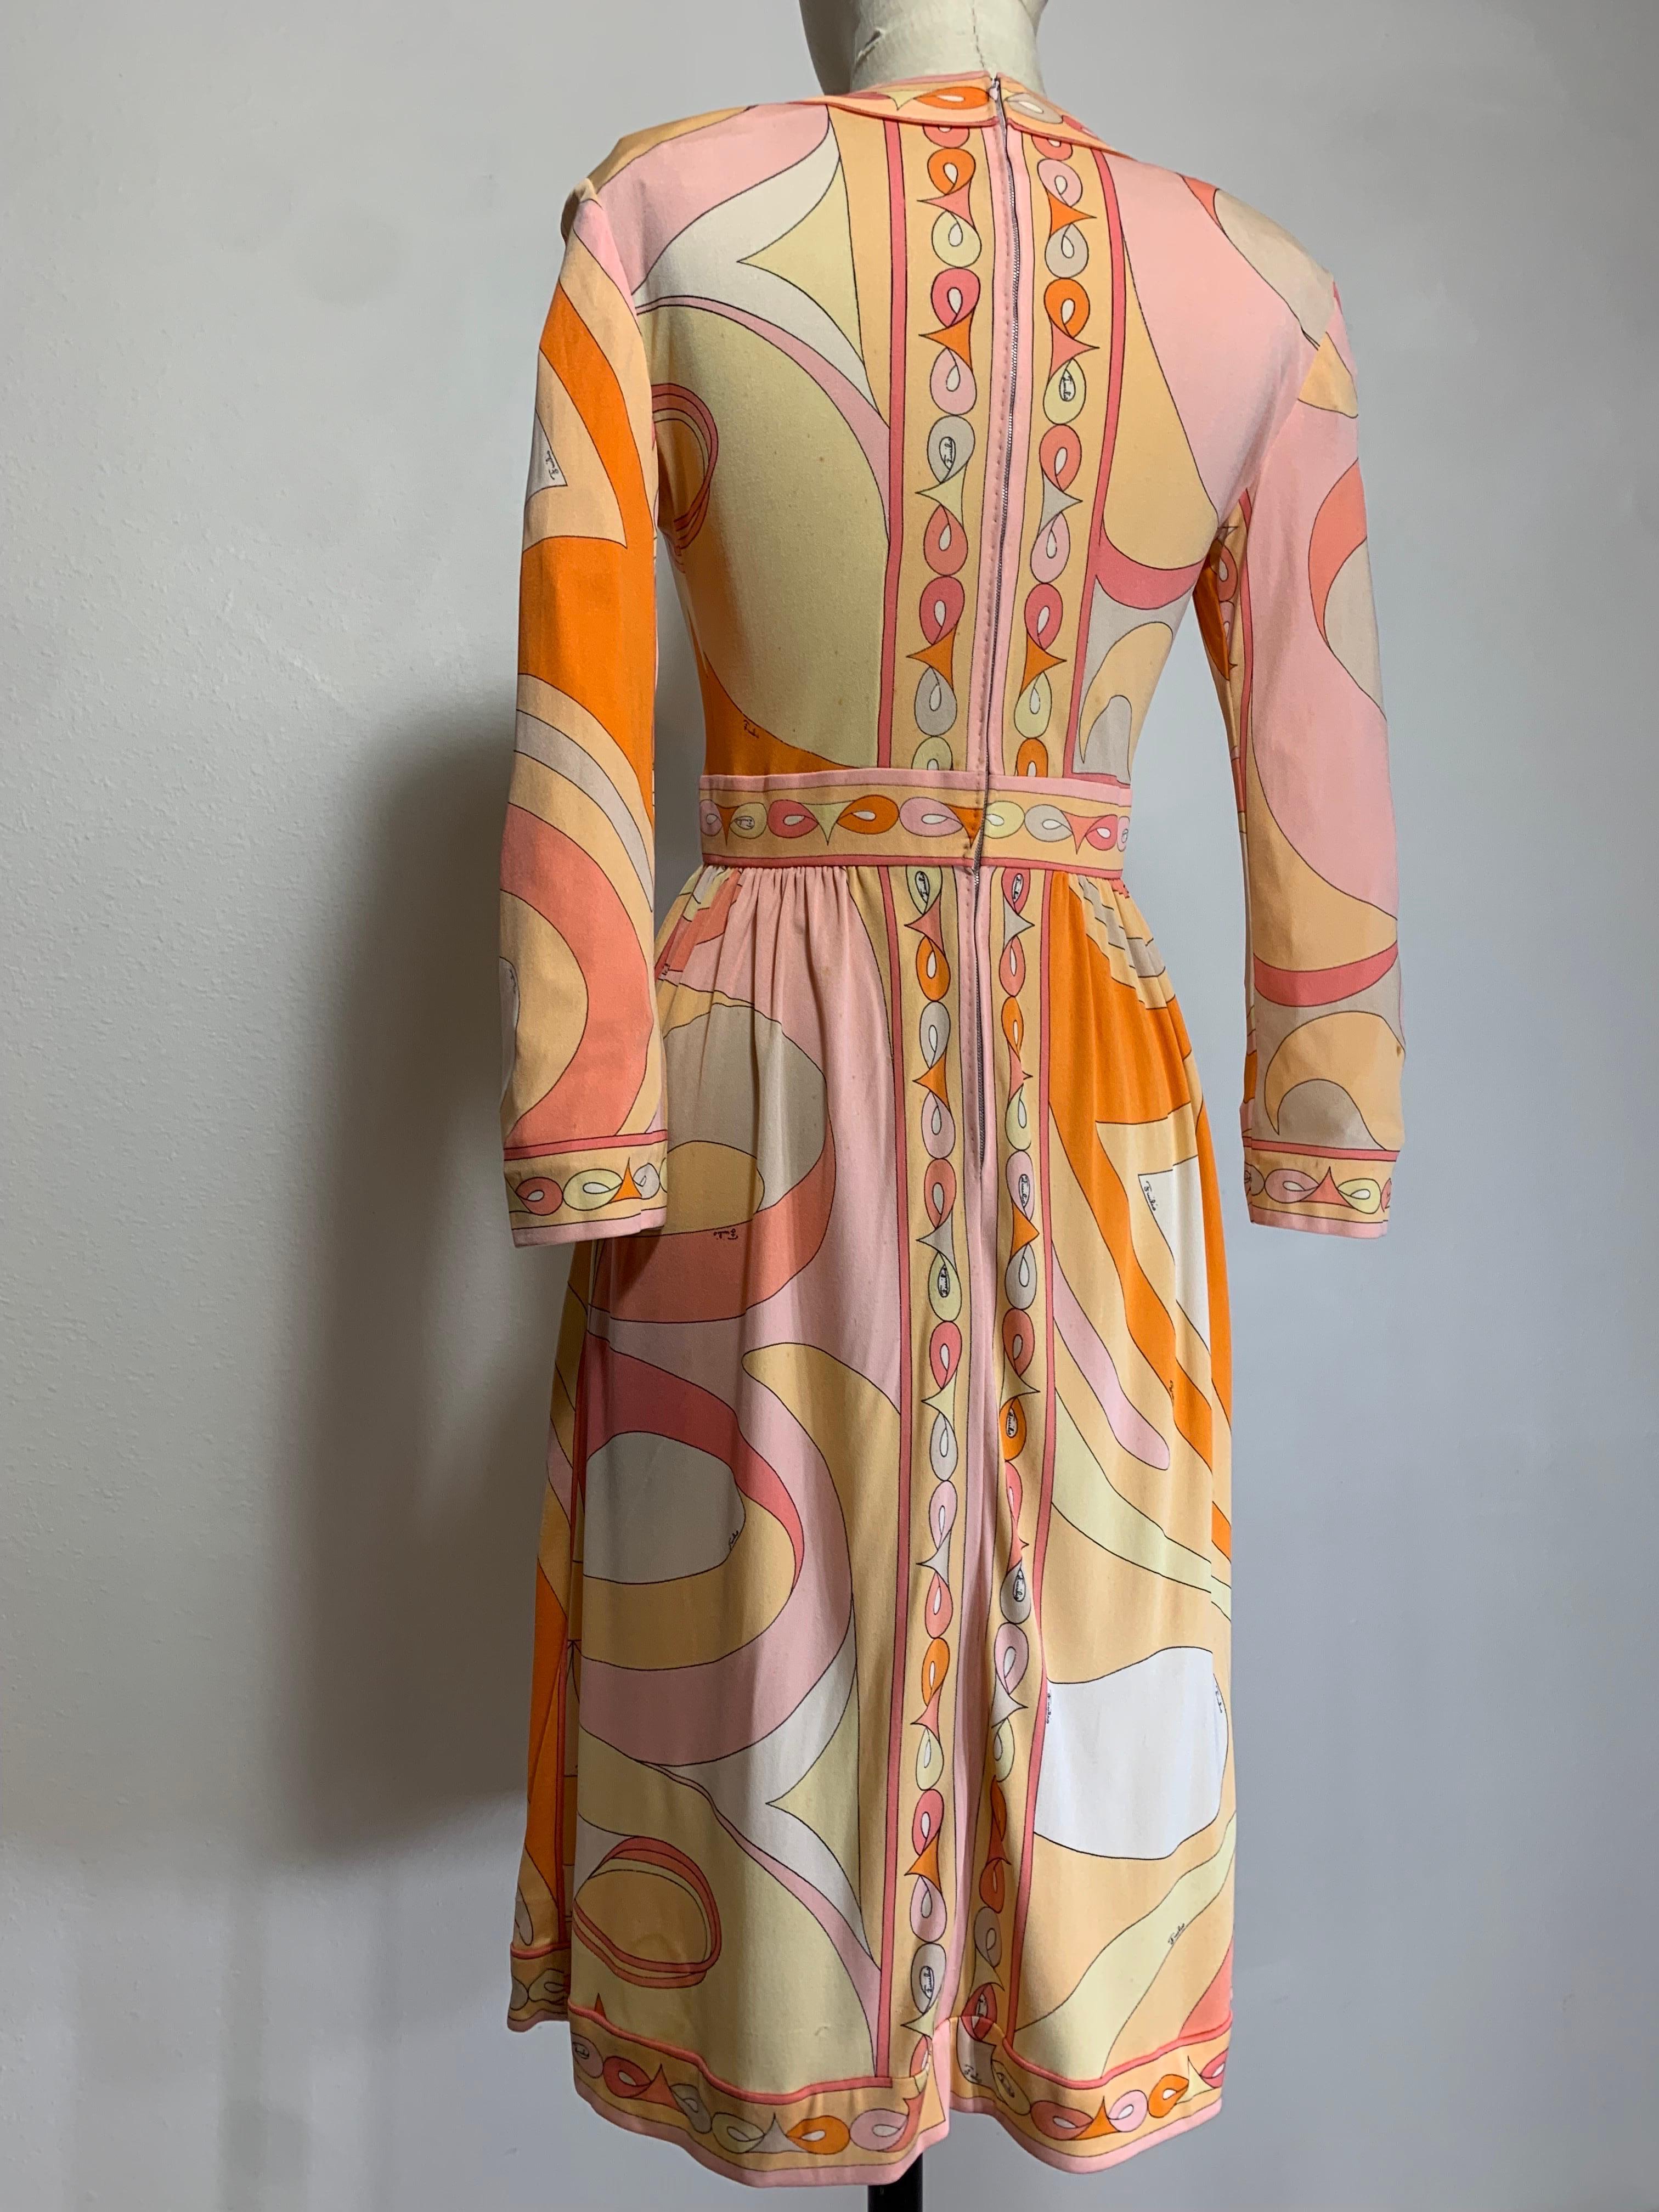 1960s Emilio Pucci Psychedelic Print Mod Day Dress w Full Skirt in Tangerine  For Sale 7